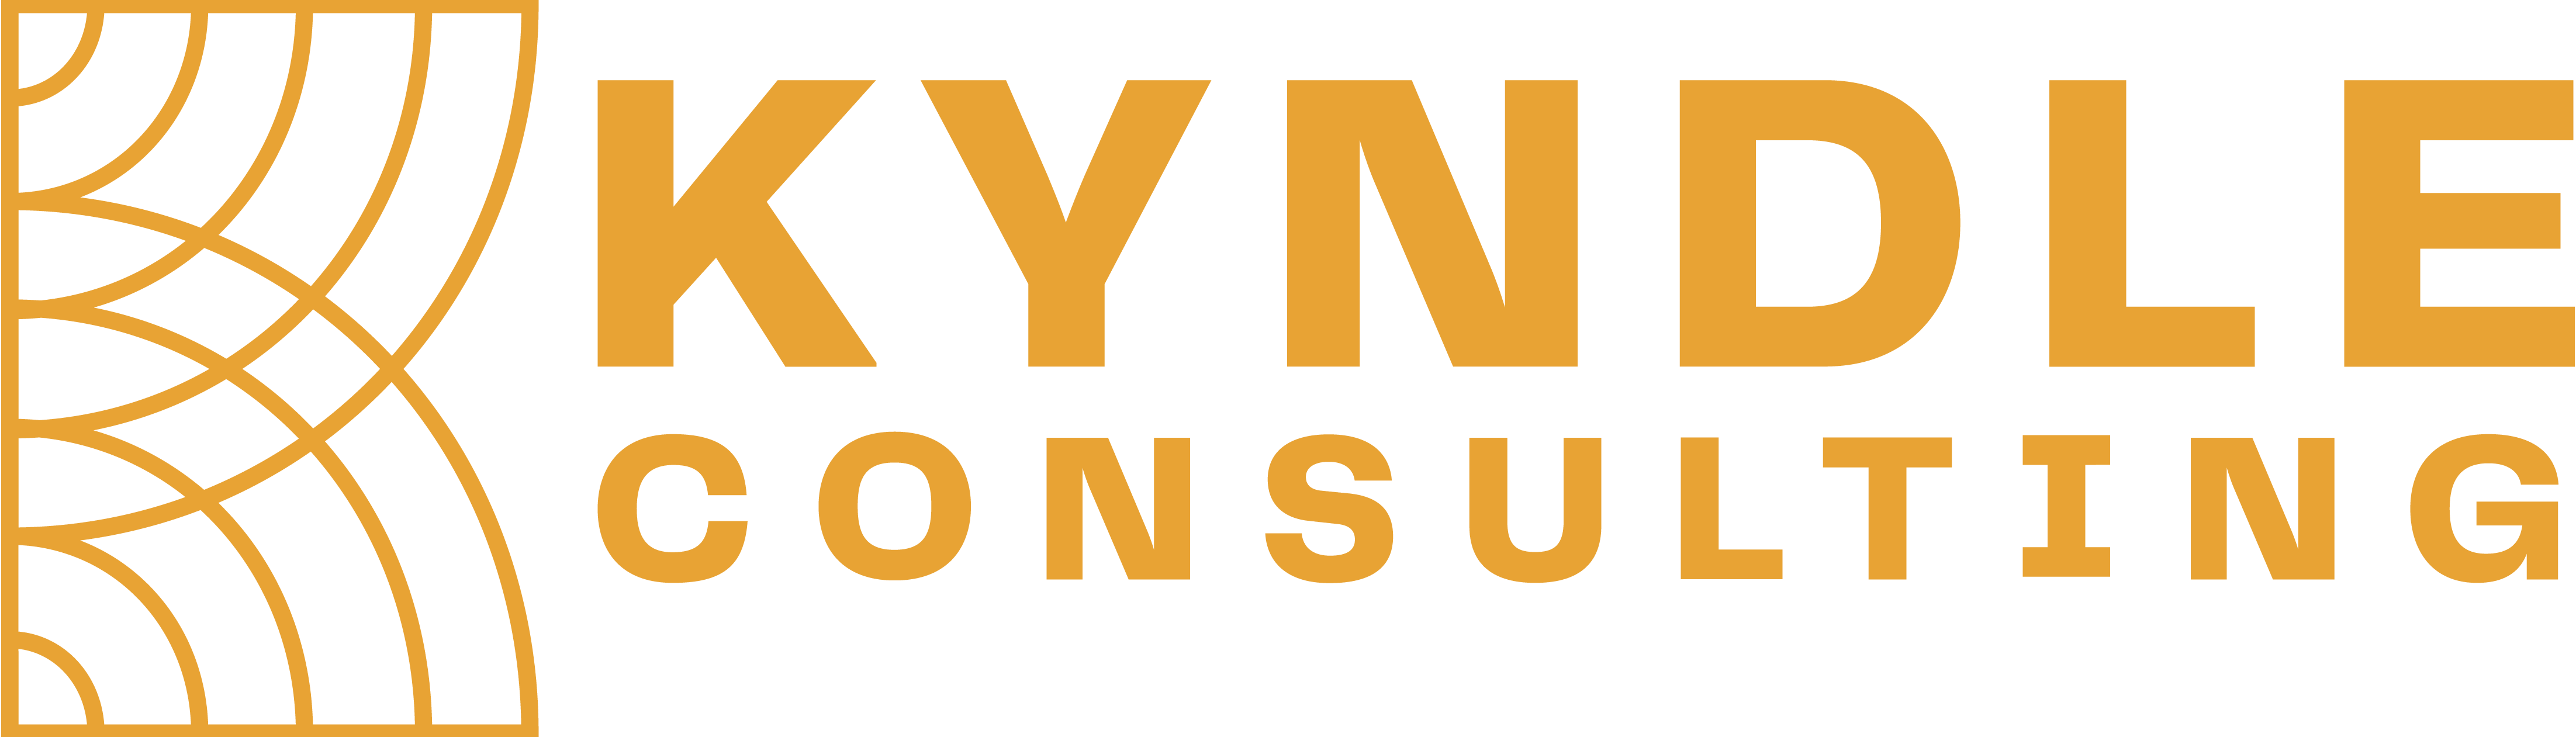 KYNDLE CONSULTING